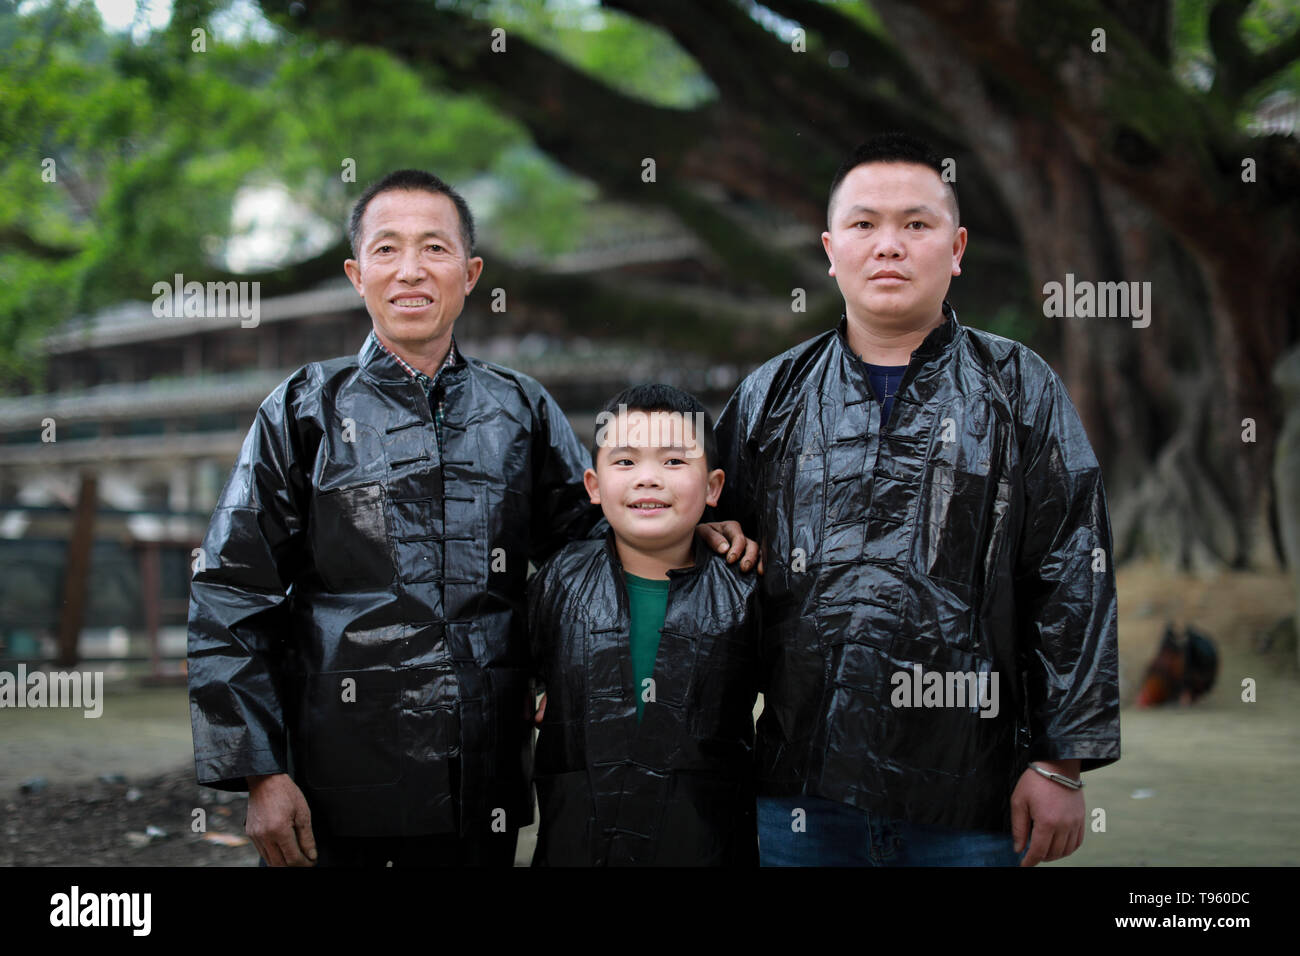 (190516) -- SIZHAI VILLAGE, May 16, 2019 (Xinhua) -- Wu You (C), an 8-year-old villager of Dong ethnic group at Sizhai Village, poses with his father Wu Fagui (R) and his grandfather Wu Zhiji in Sizhai Village of Shuangjiang Township, Liping County, Miao-Dong Autonomous Prefecture of Qiandongnan, southwest China's Guizhou Province, April 17, 2019. Wu You has been practising traditional wrestling of Dong ethnic group coached by his father Wu Fagui, a former champion of traditional wrestling competition. In April, he competed as the youngest player of Sizhai Village in the annual Wrestling Festi Stock Photo